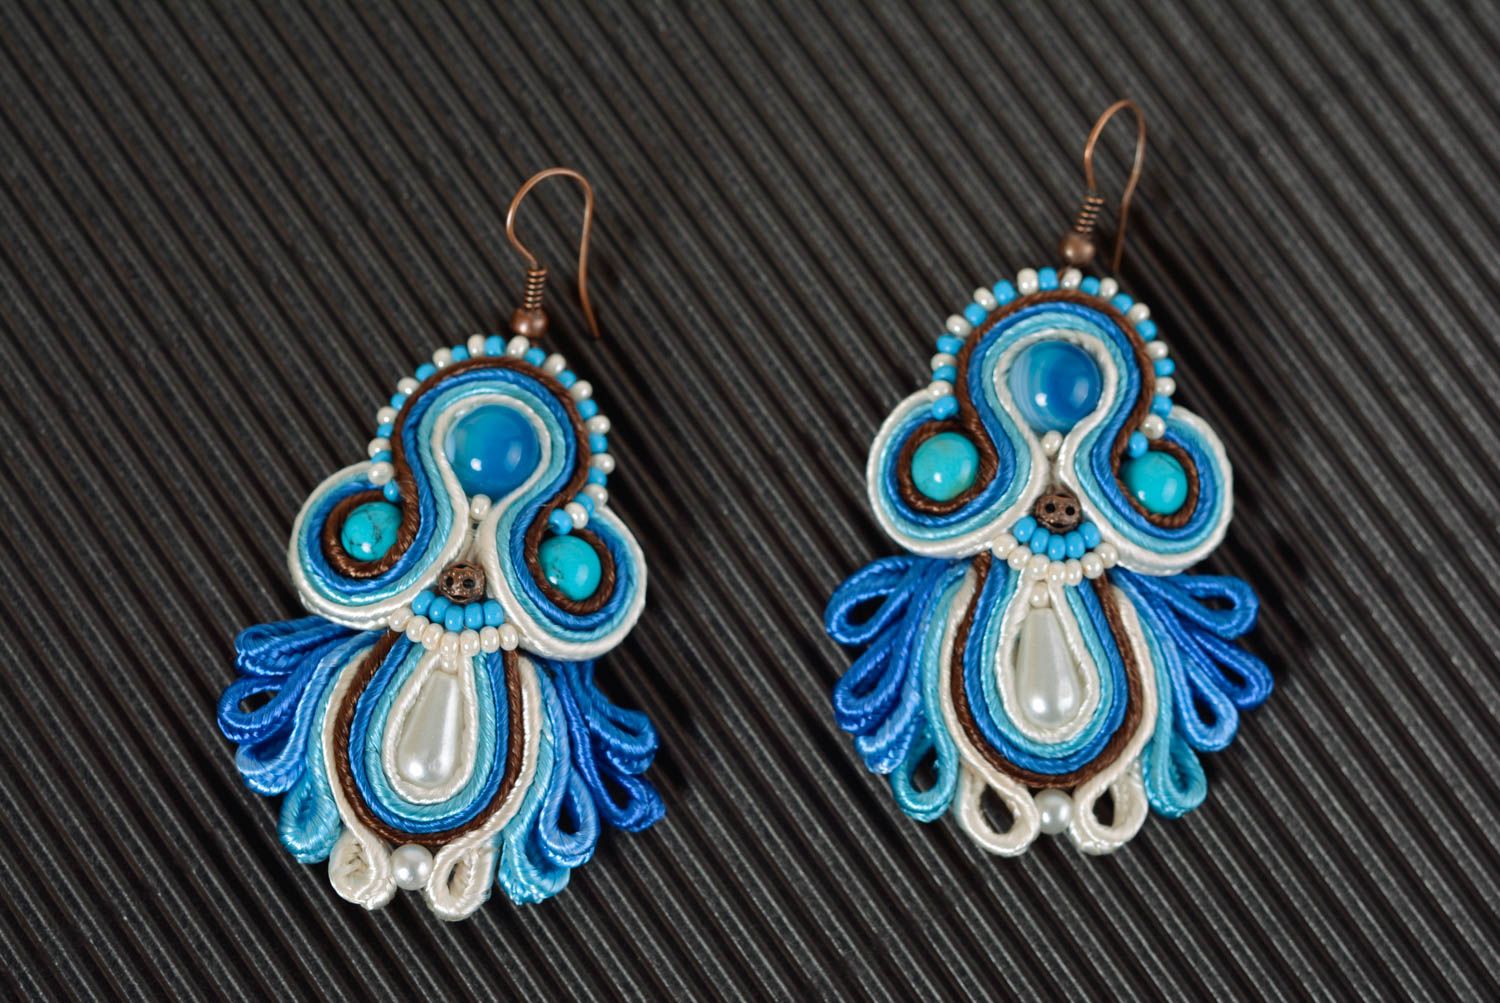 Handmade earrings soutache earrings evening accessories with natural stones photo 1